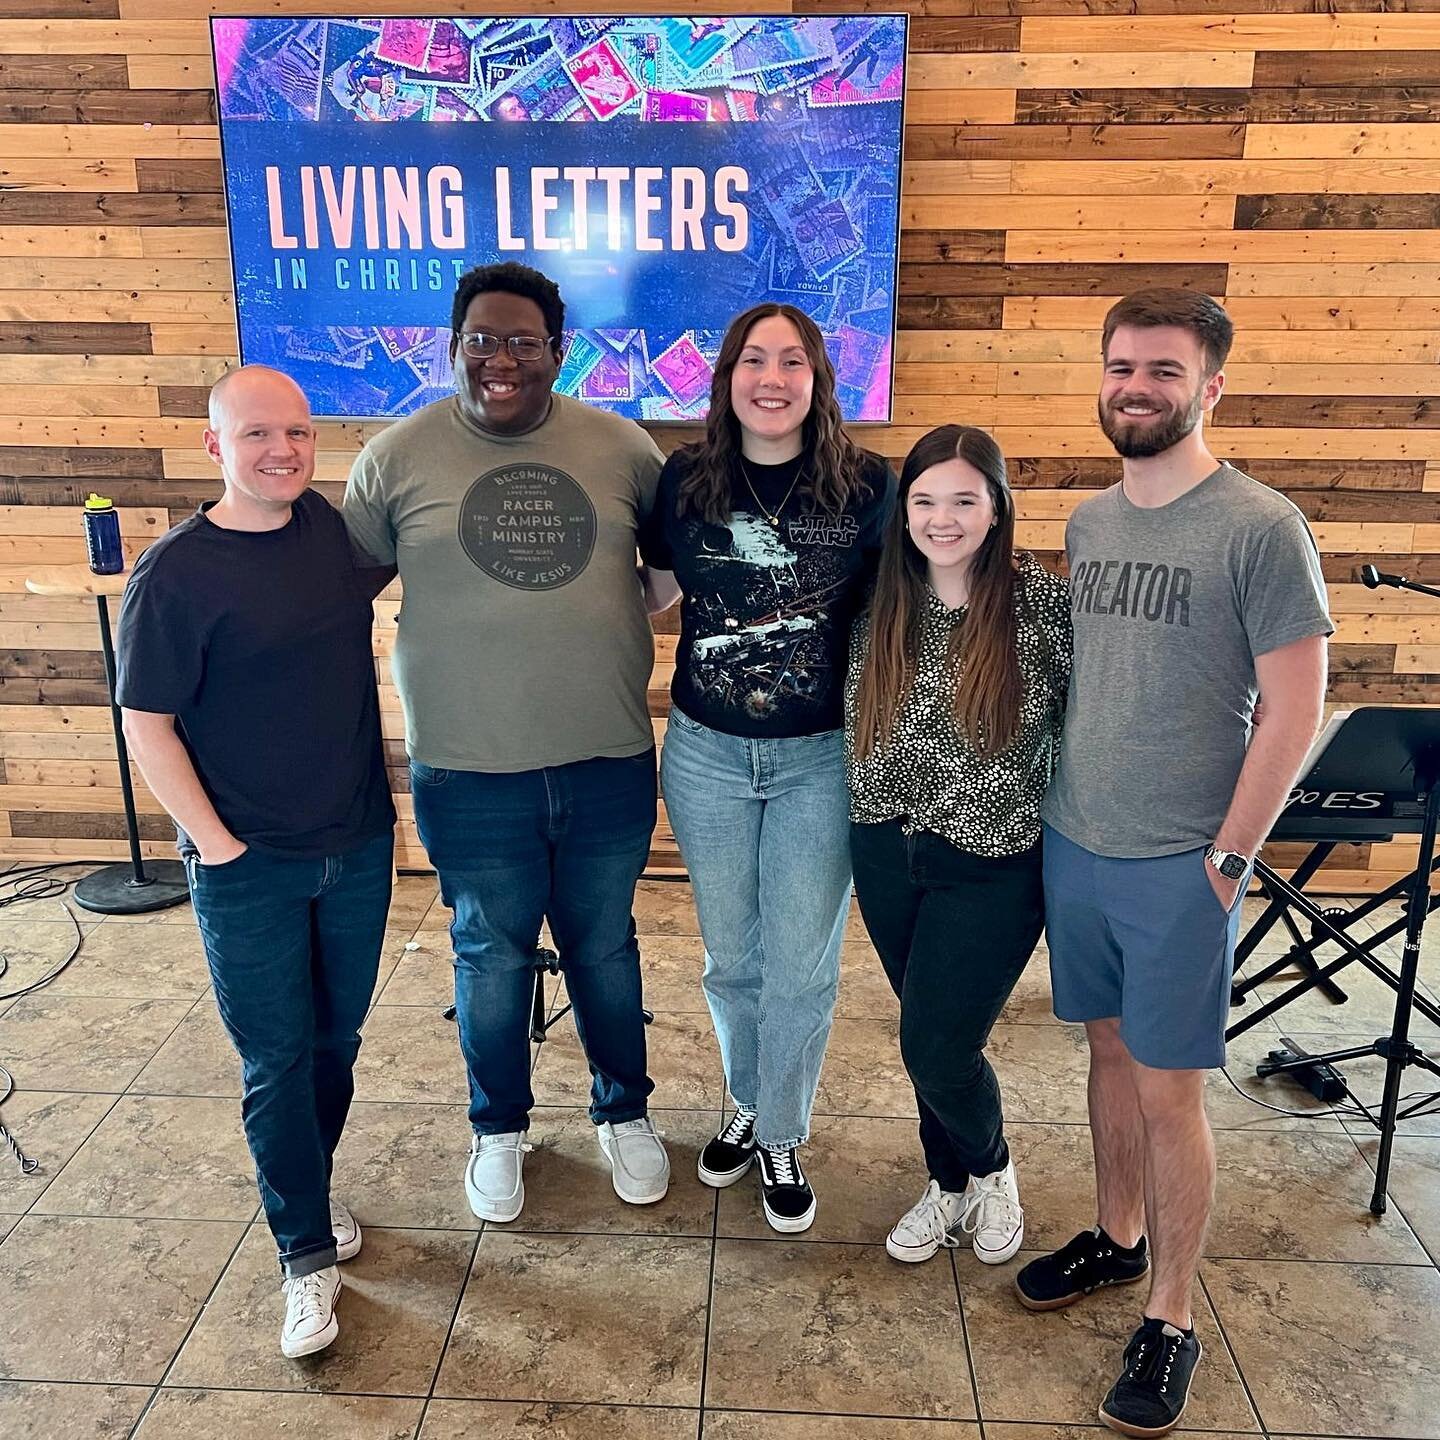 WORSHIP TEAM
-
This crew. Just amazing. They have been faithful to God and our ministry by leading worship every week for years now. 
-
Singing acappella and instrumental has a beauty and a unity to it but it also brings a difficulty from time to tim